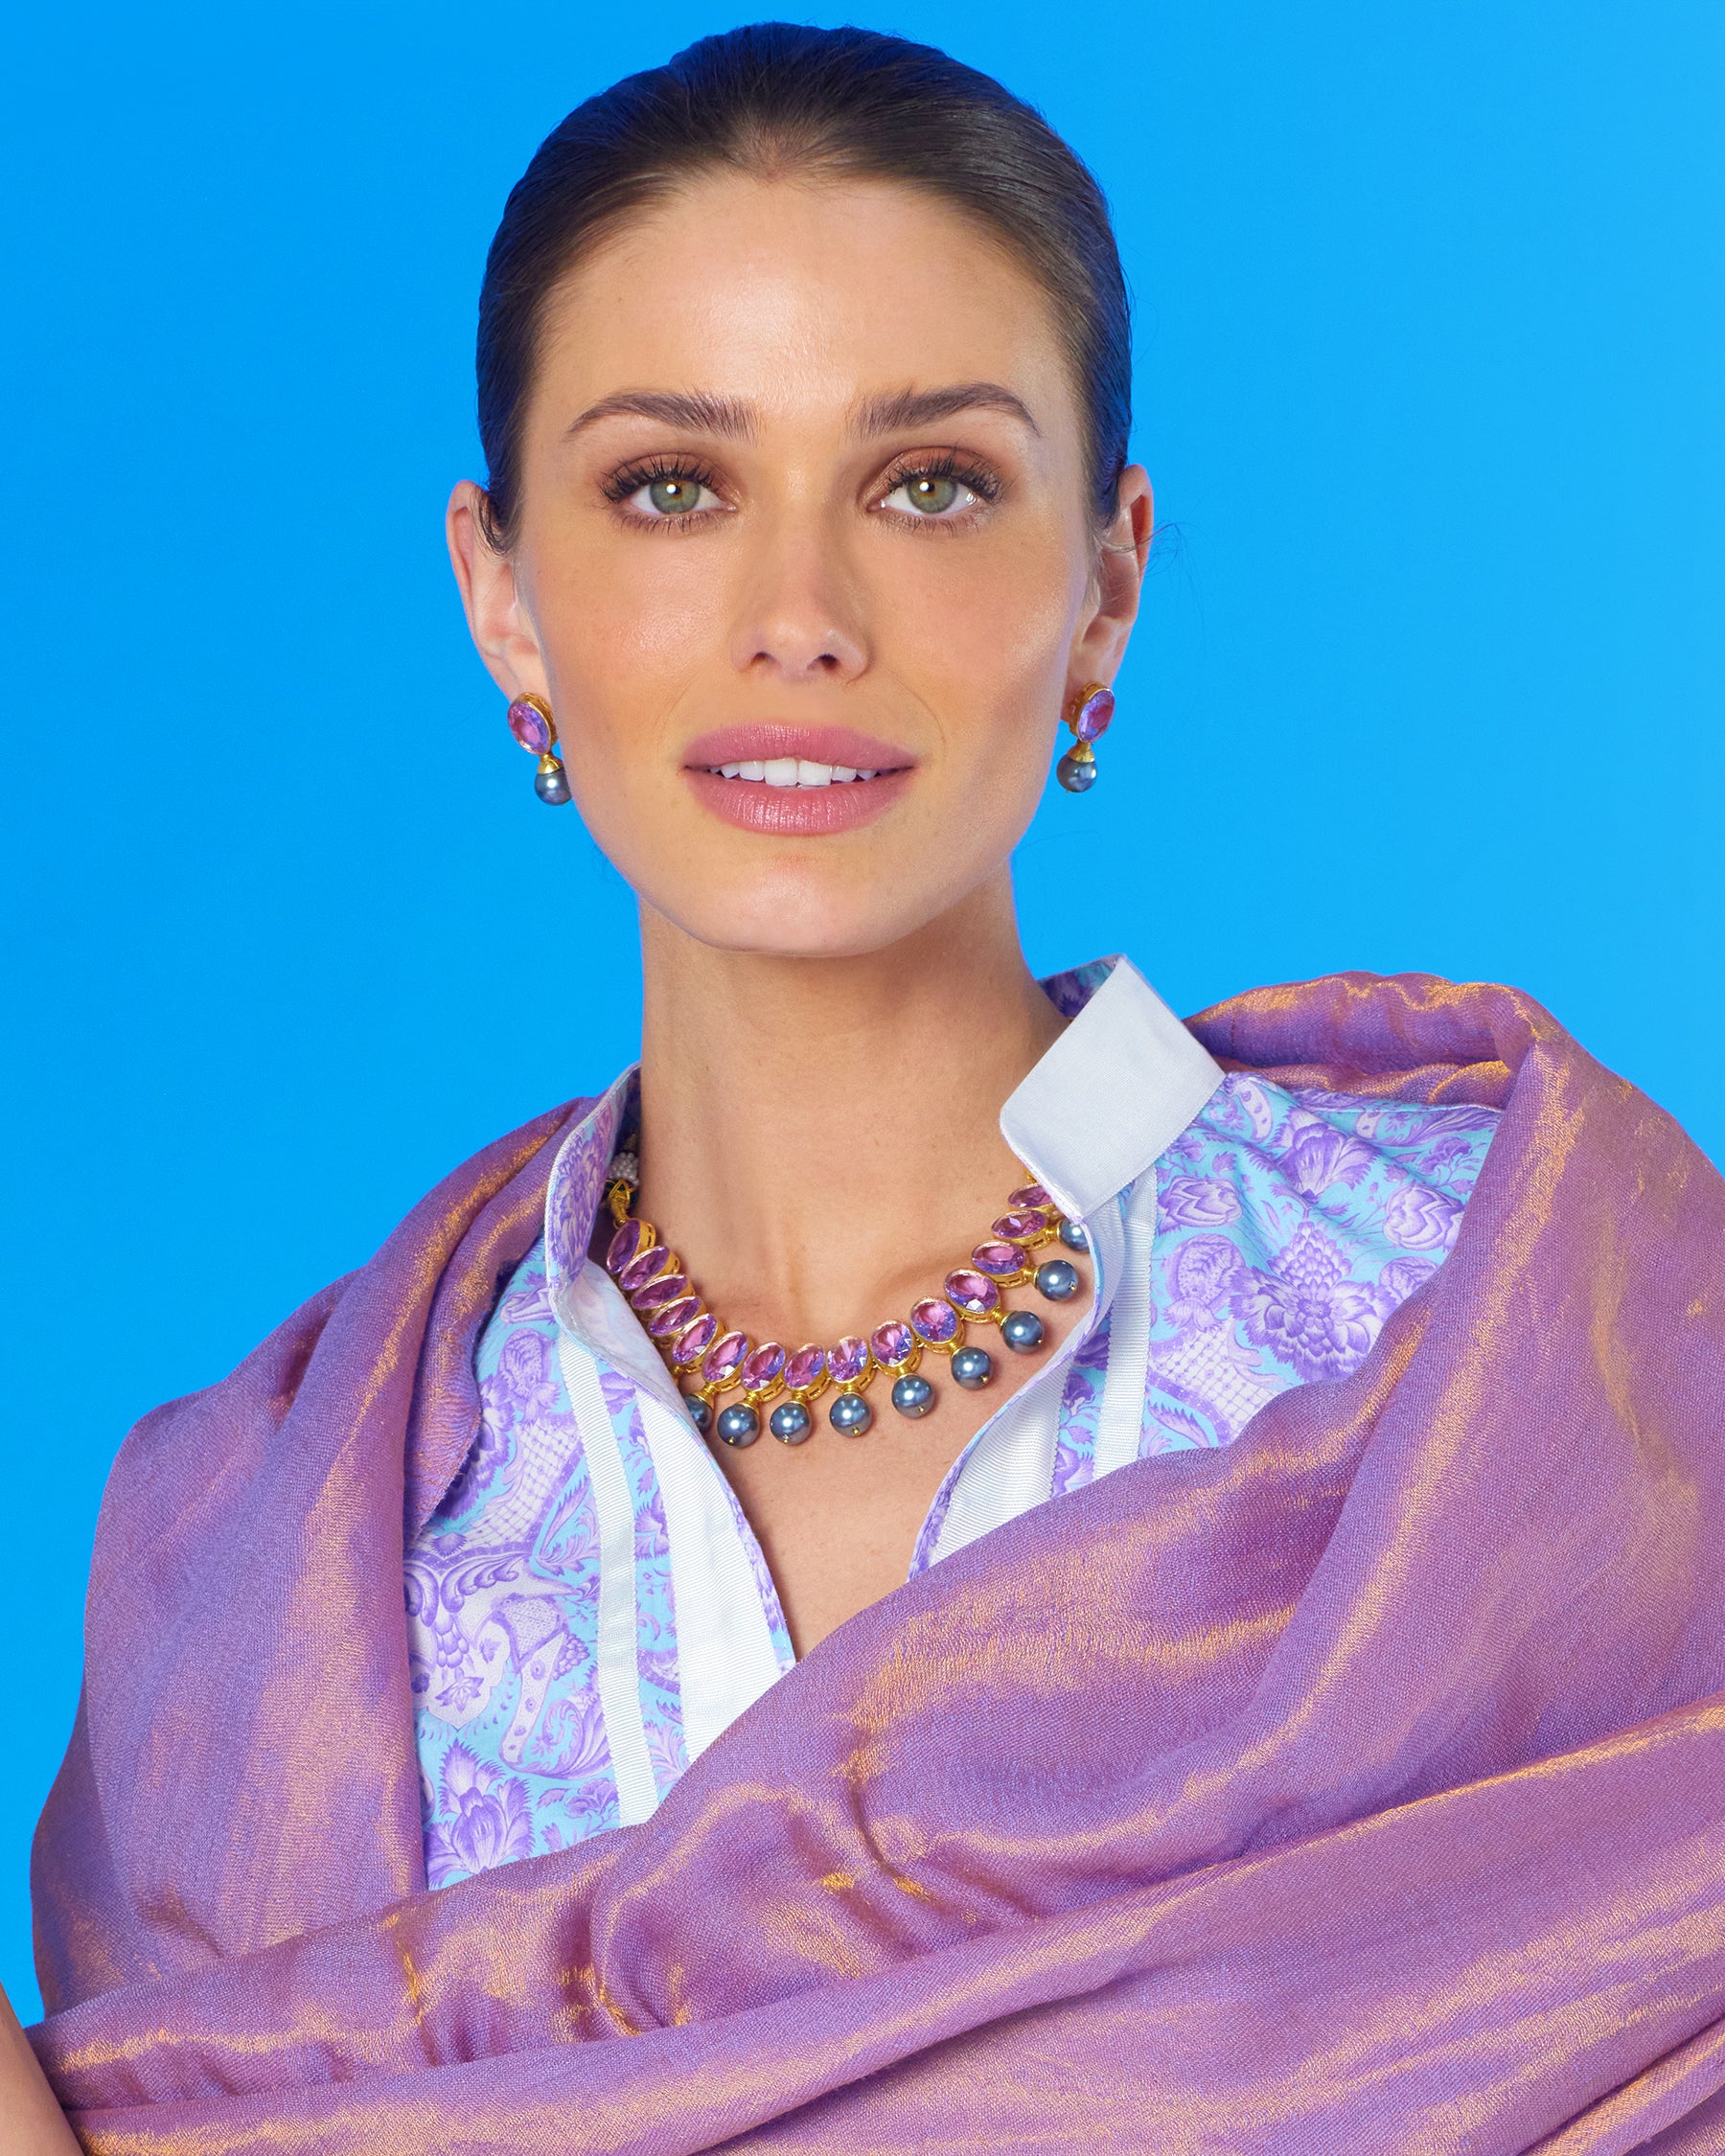 Gia Statement Necklace in Amethyst Lavender qorn with the Capri Long Tunic Dress in Lavender Shalimar